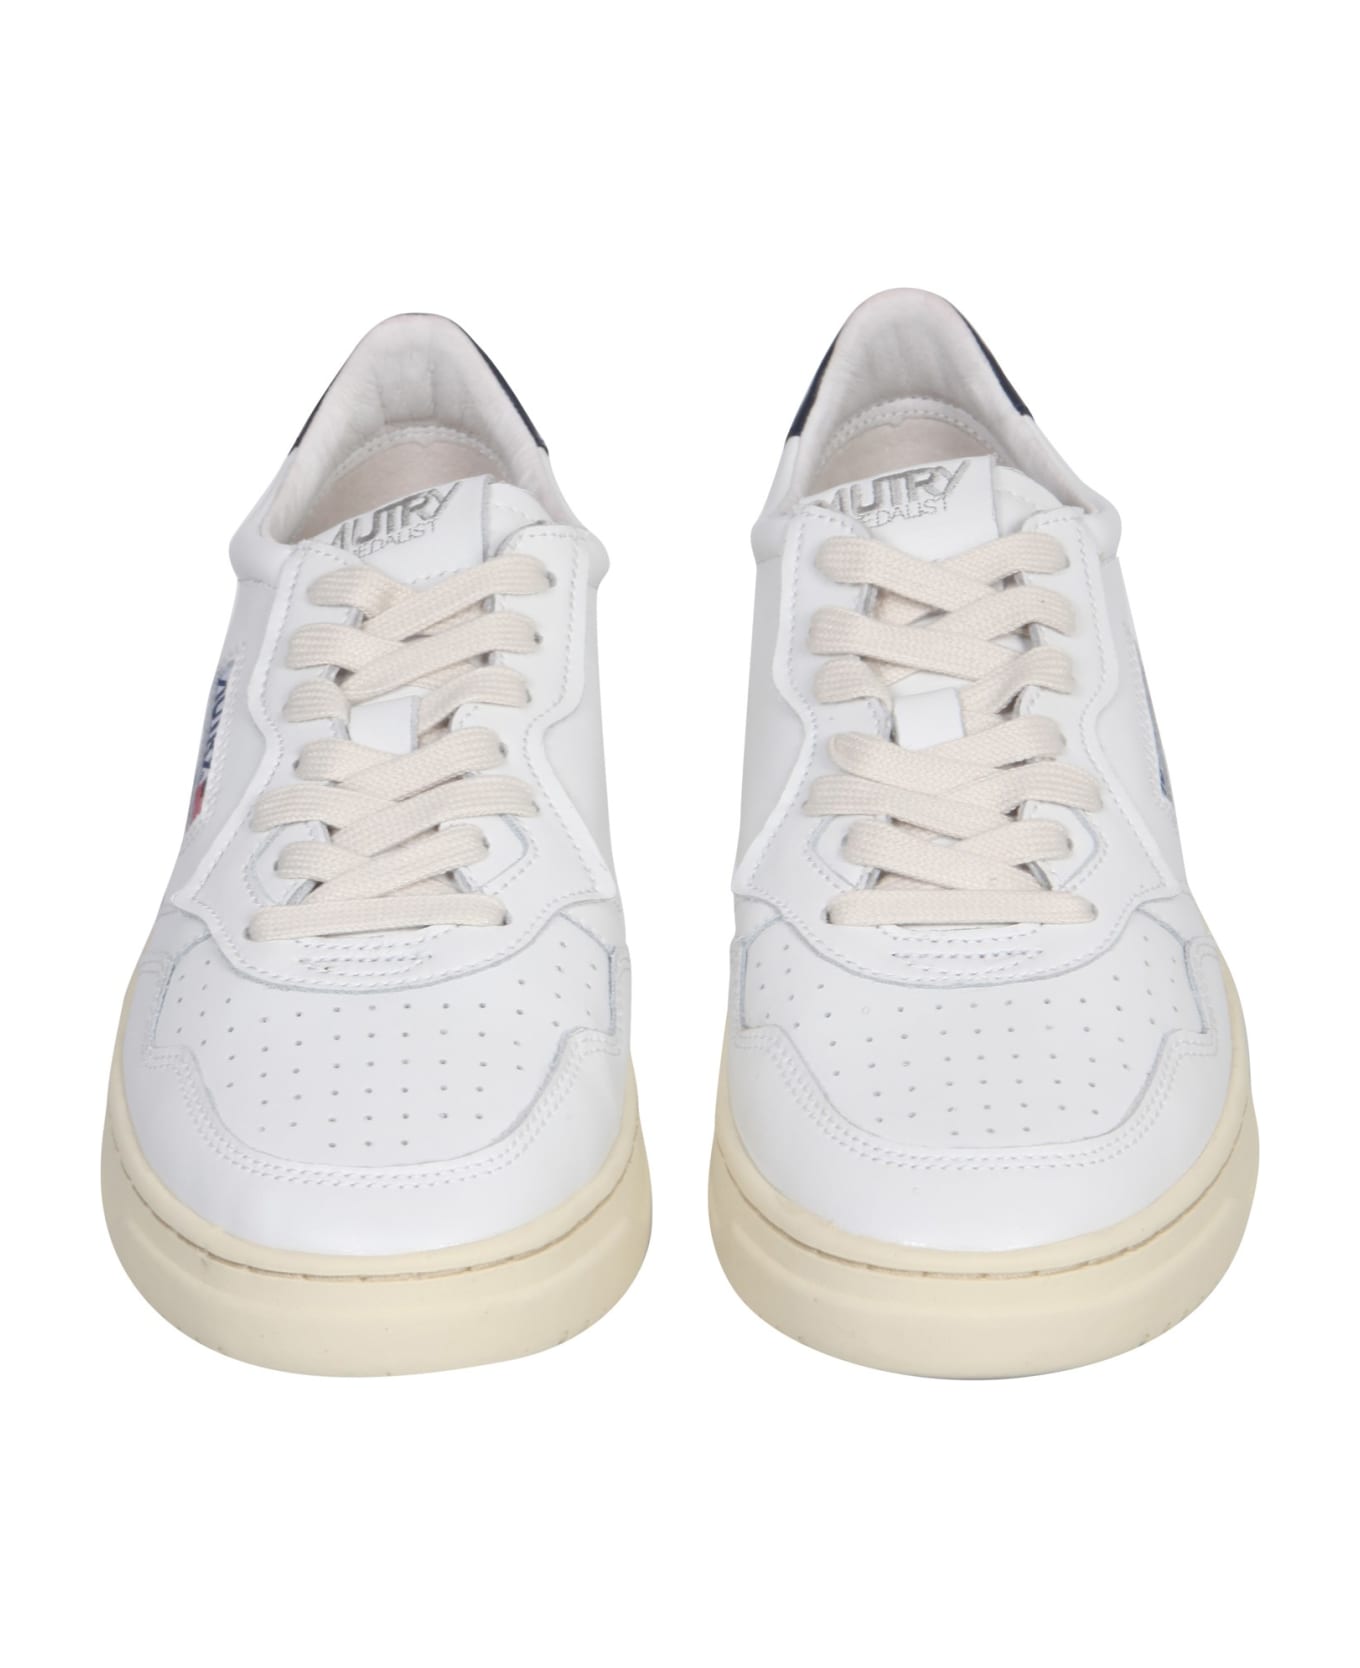 Autry Medalist Low Sneakers In White And Navy Blue Leather - Bianco スニーカー